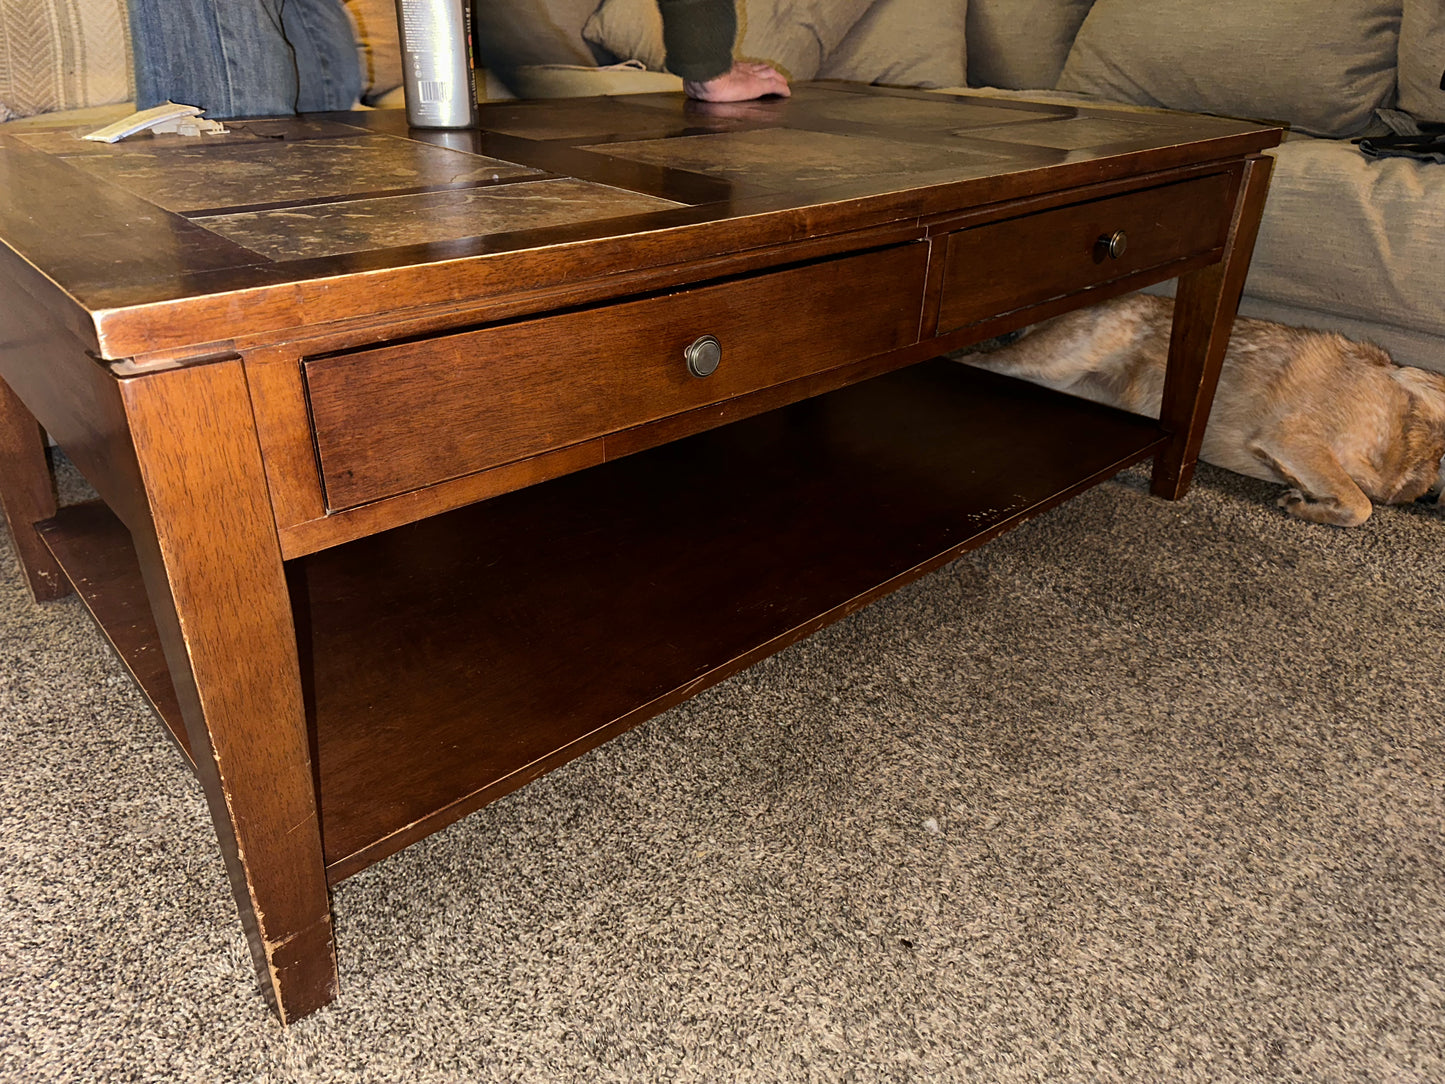 Wooden 4-Drawer Coffee Table w/ Tile Inset